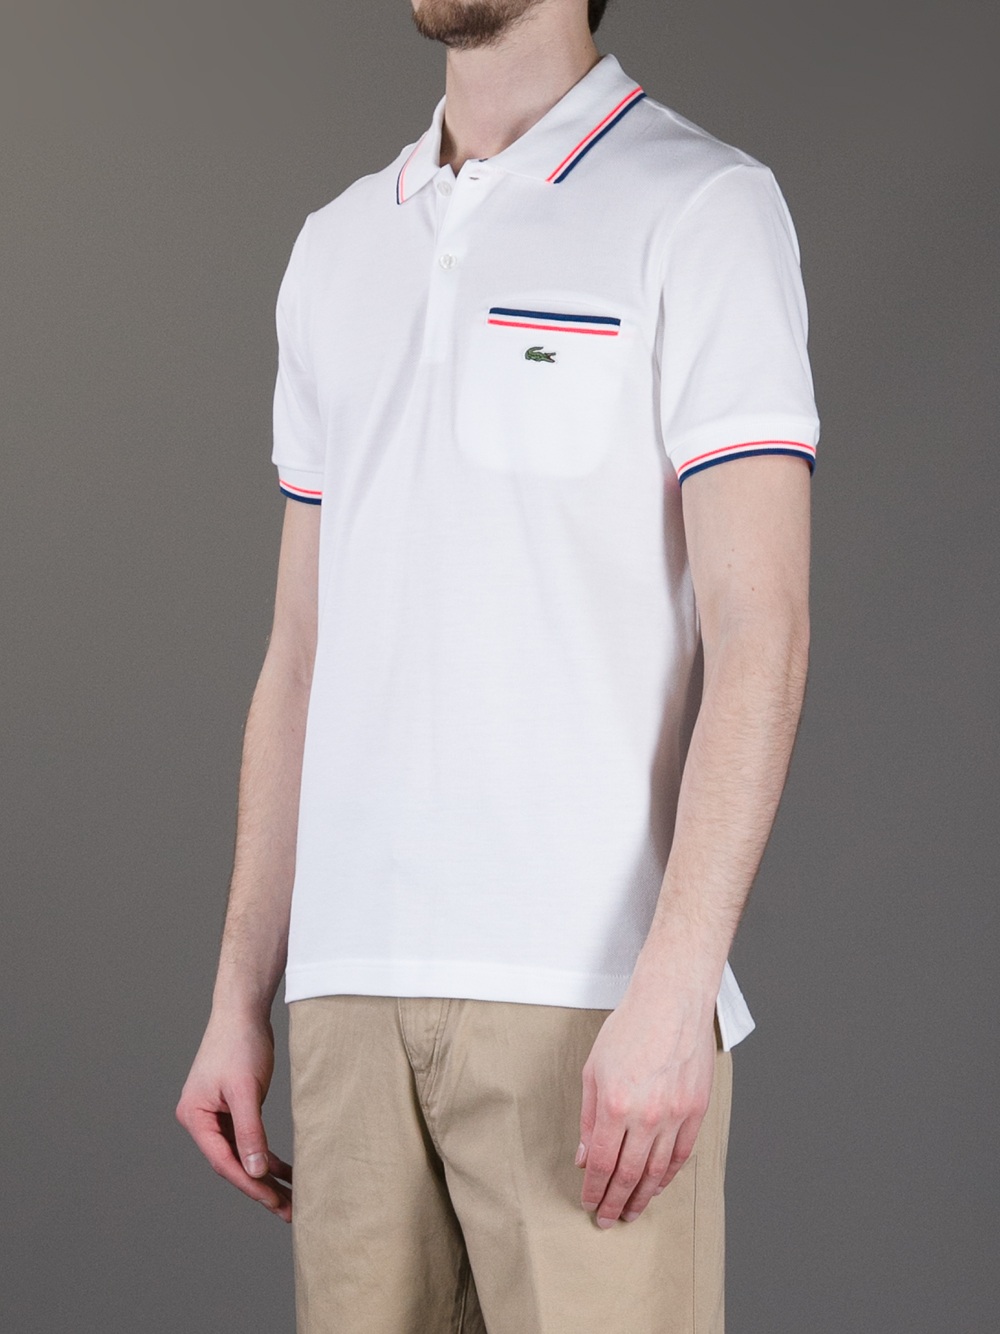 støj Persona hegn Lacoste L!ive Polo Shirt with Pocket in White for Men | Lyst